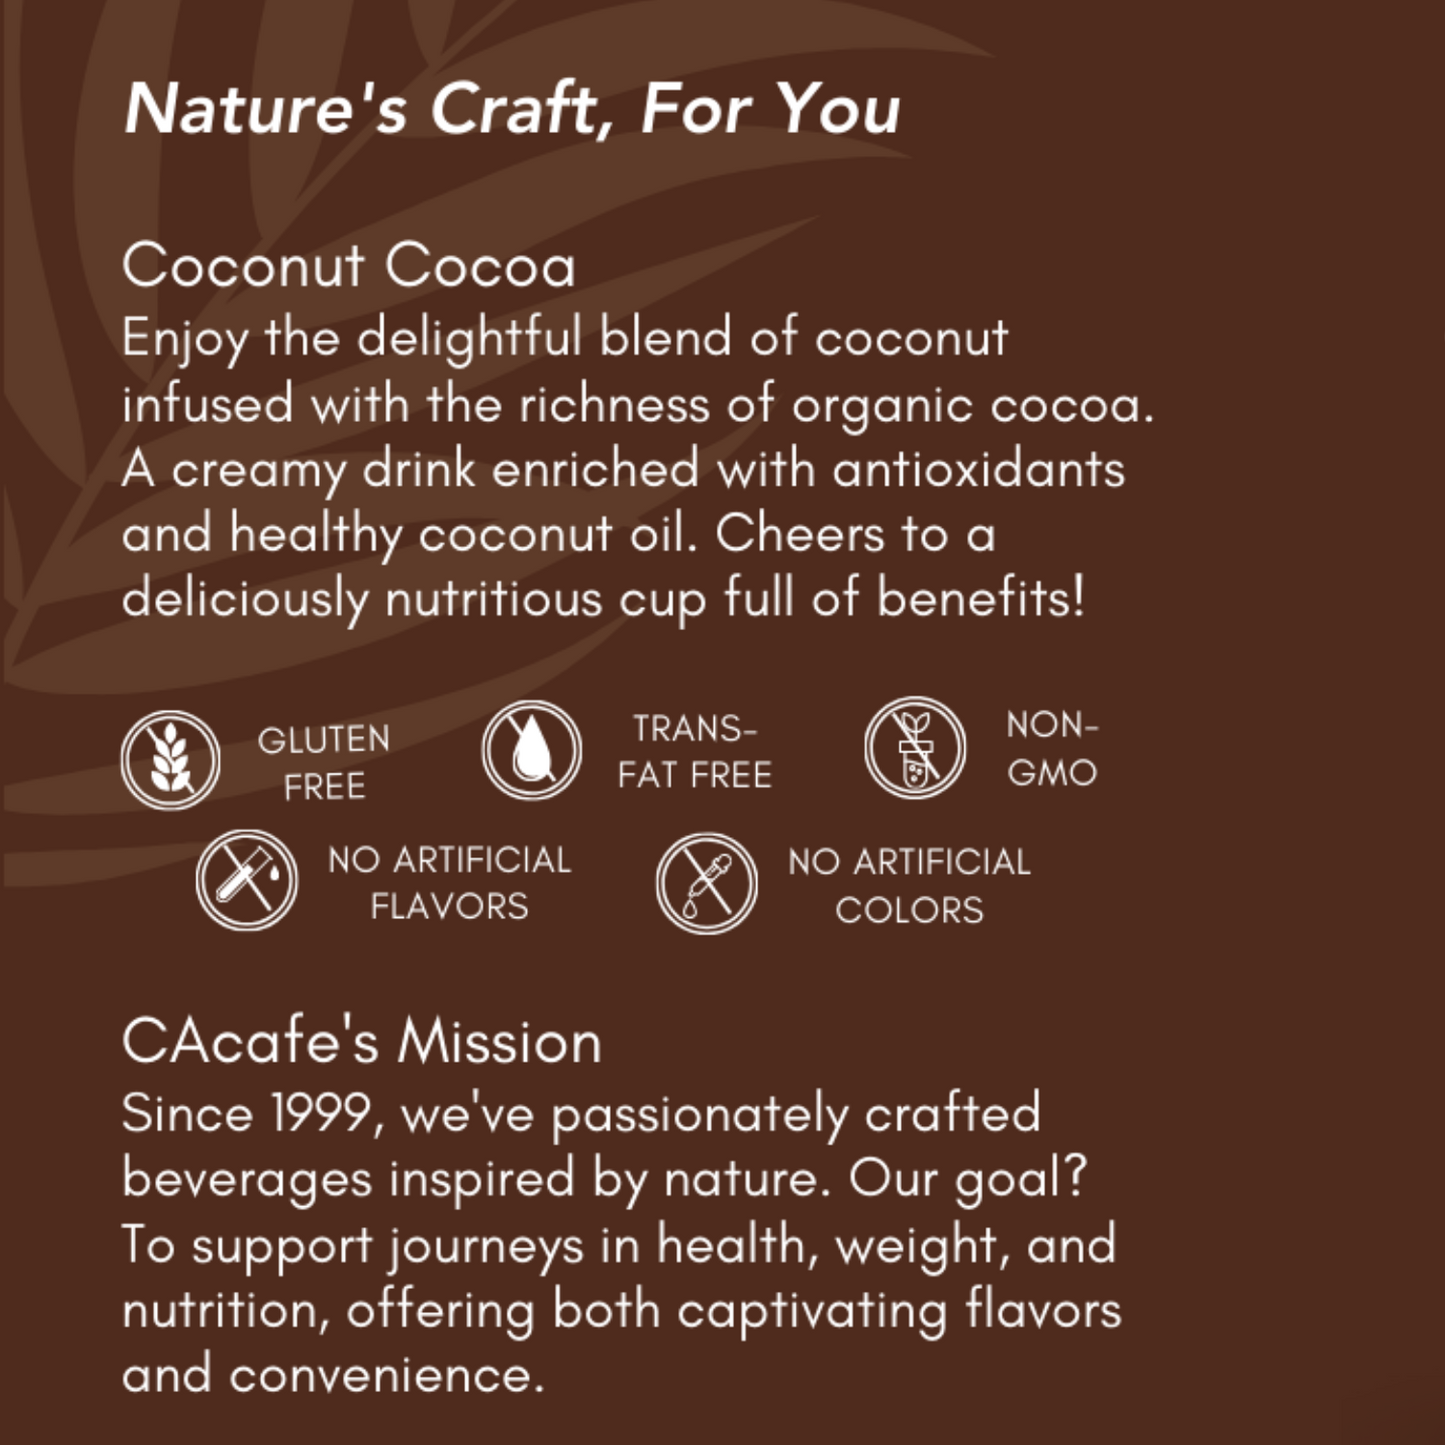 6 pack of Coconut Cocoa (New Look) _ 19.05oz each